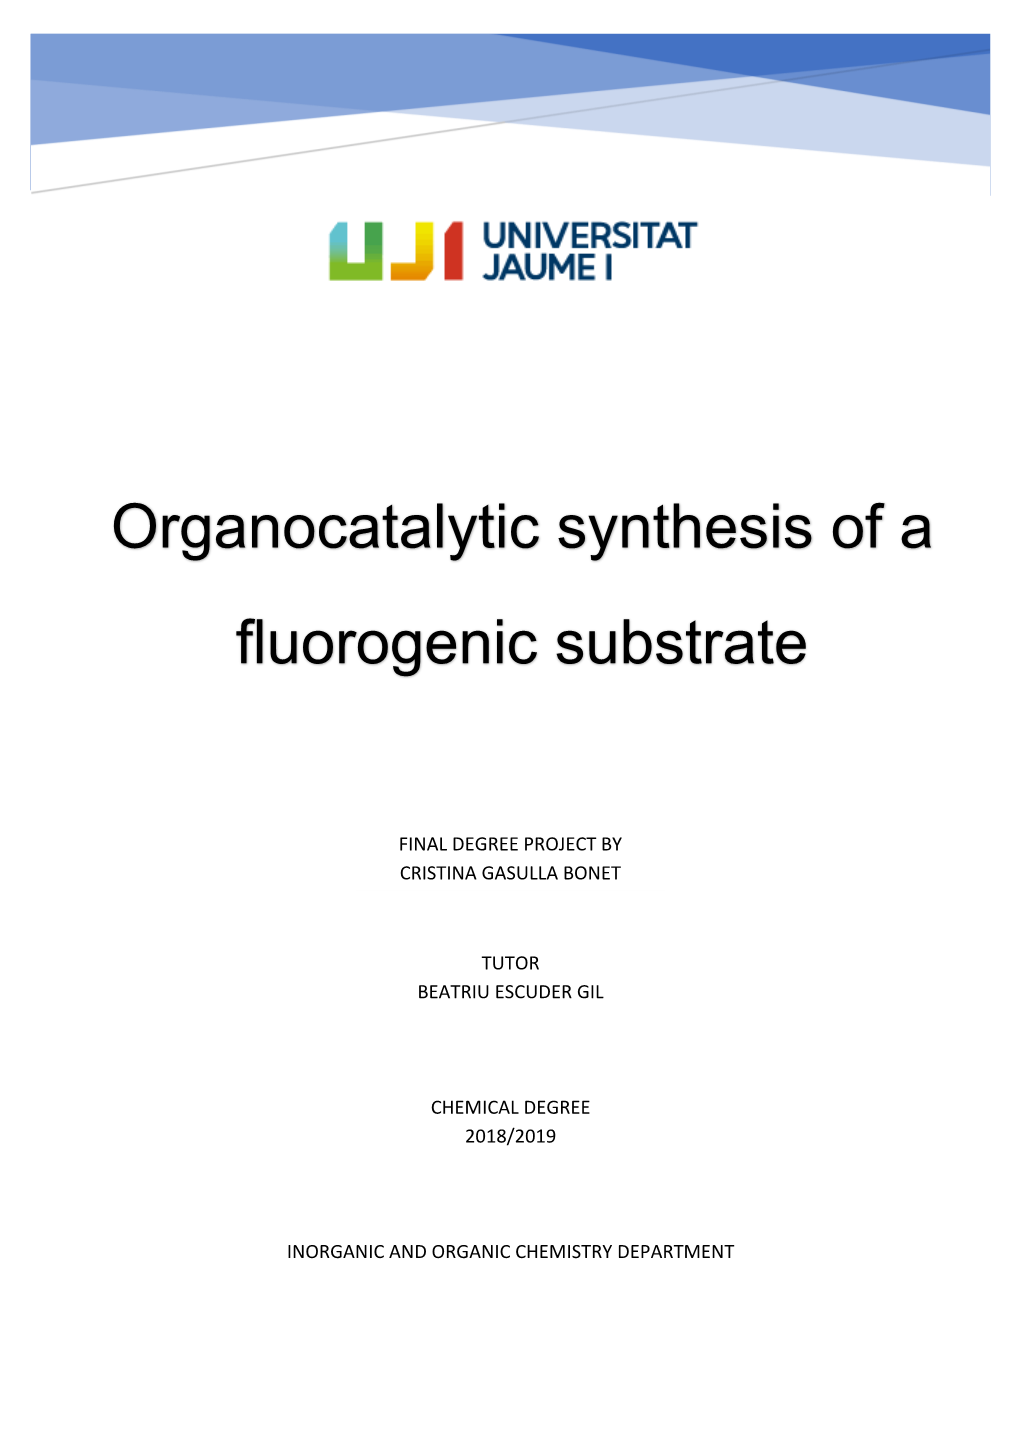 Organocatalytic Synthesis of a Fluorogenic Substrate